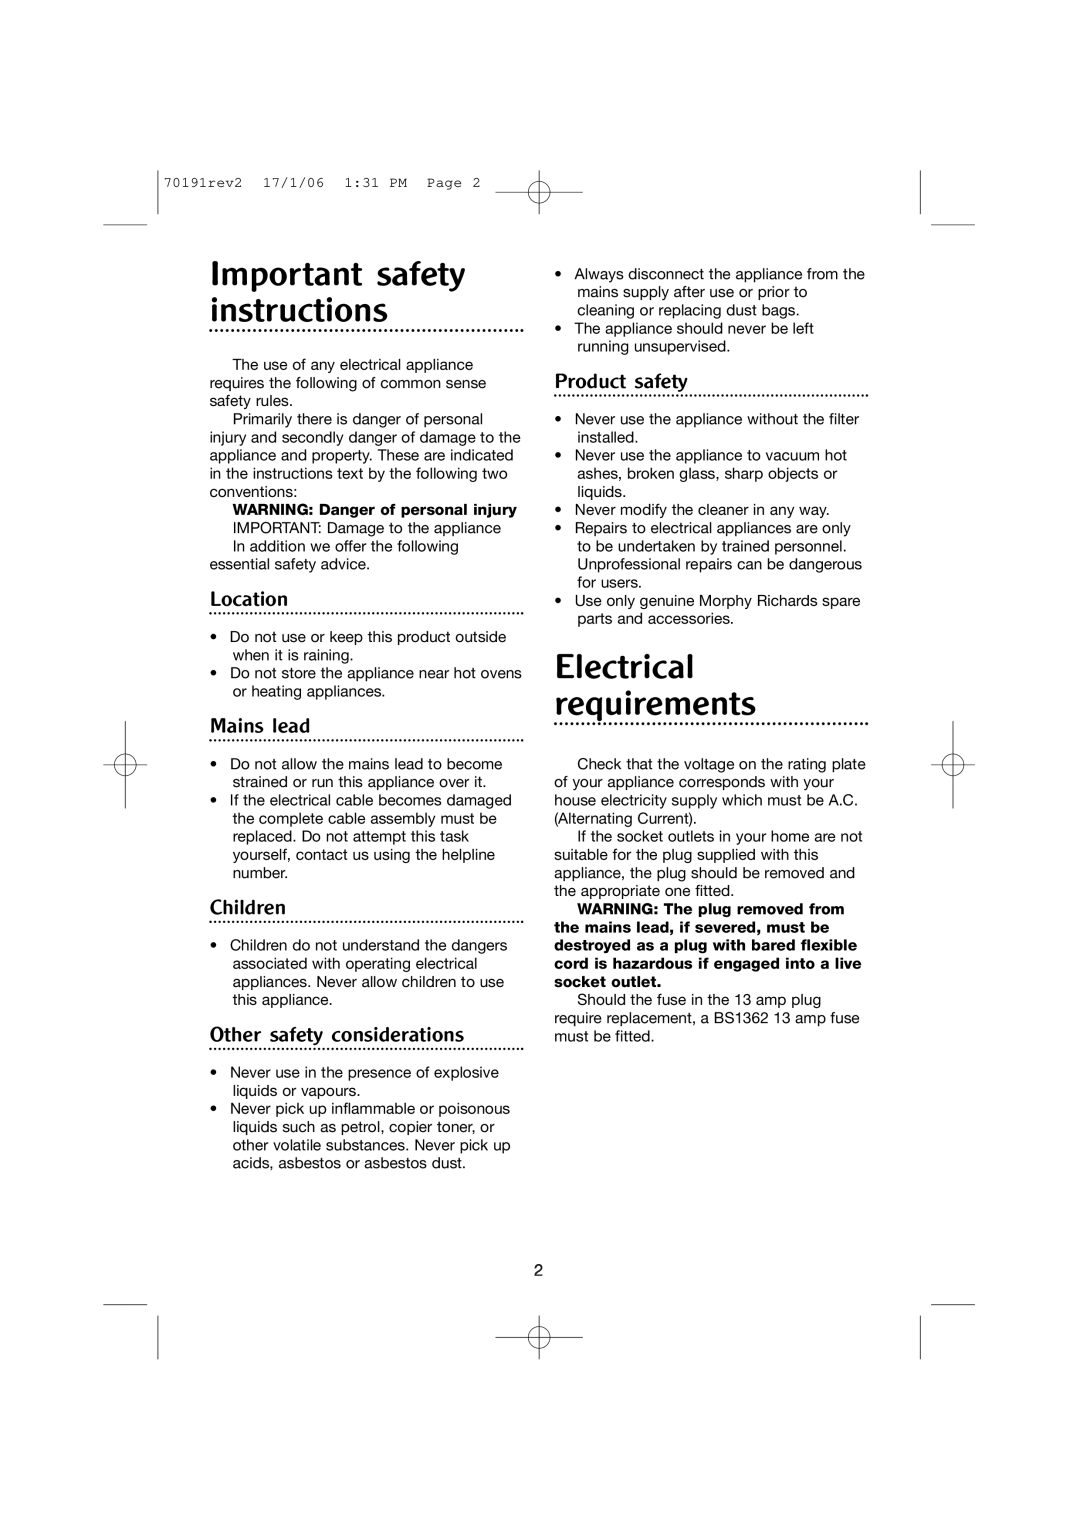 Morphy Richards 70191REV2 manual Important safety instructions, Electrical requirements, Location, Mains lead, Children 